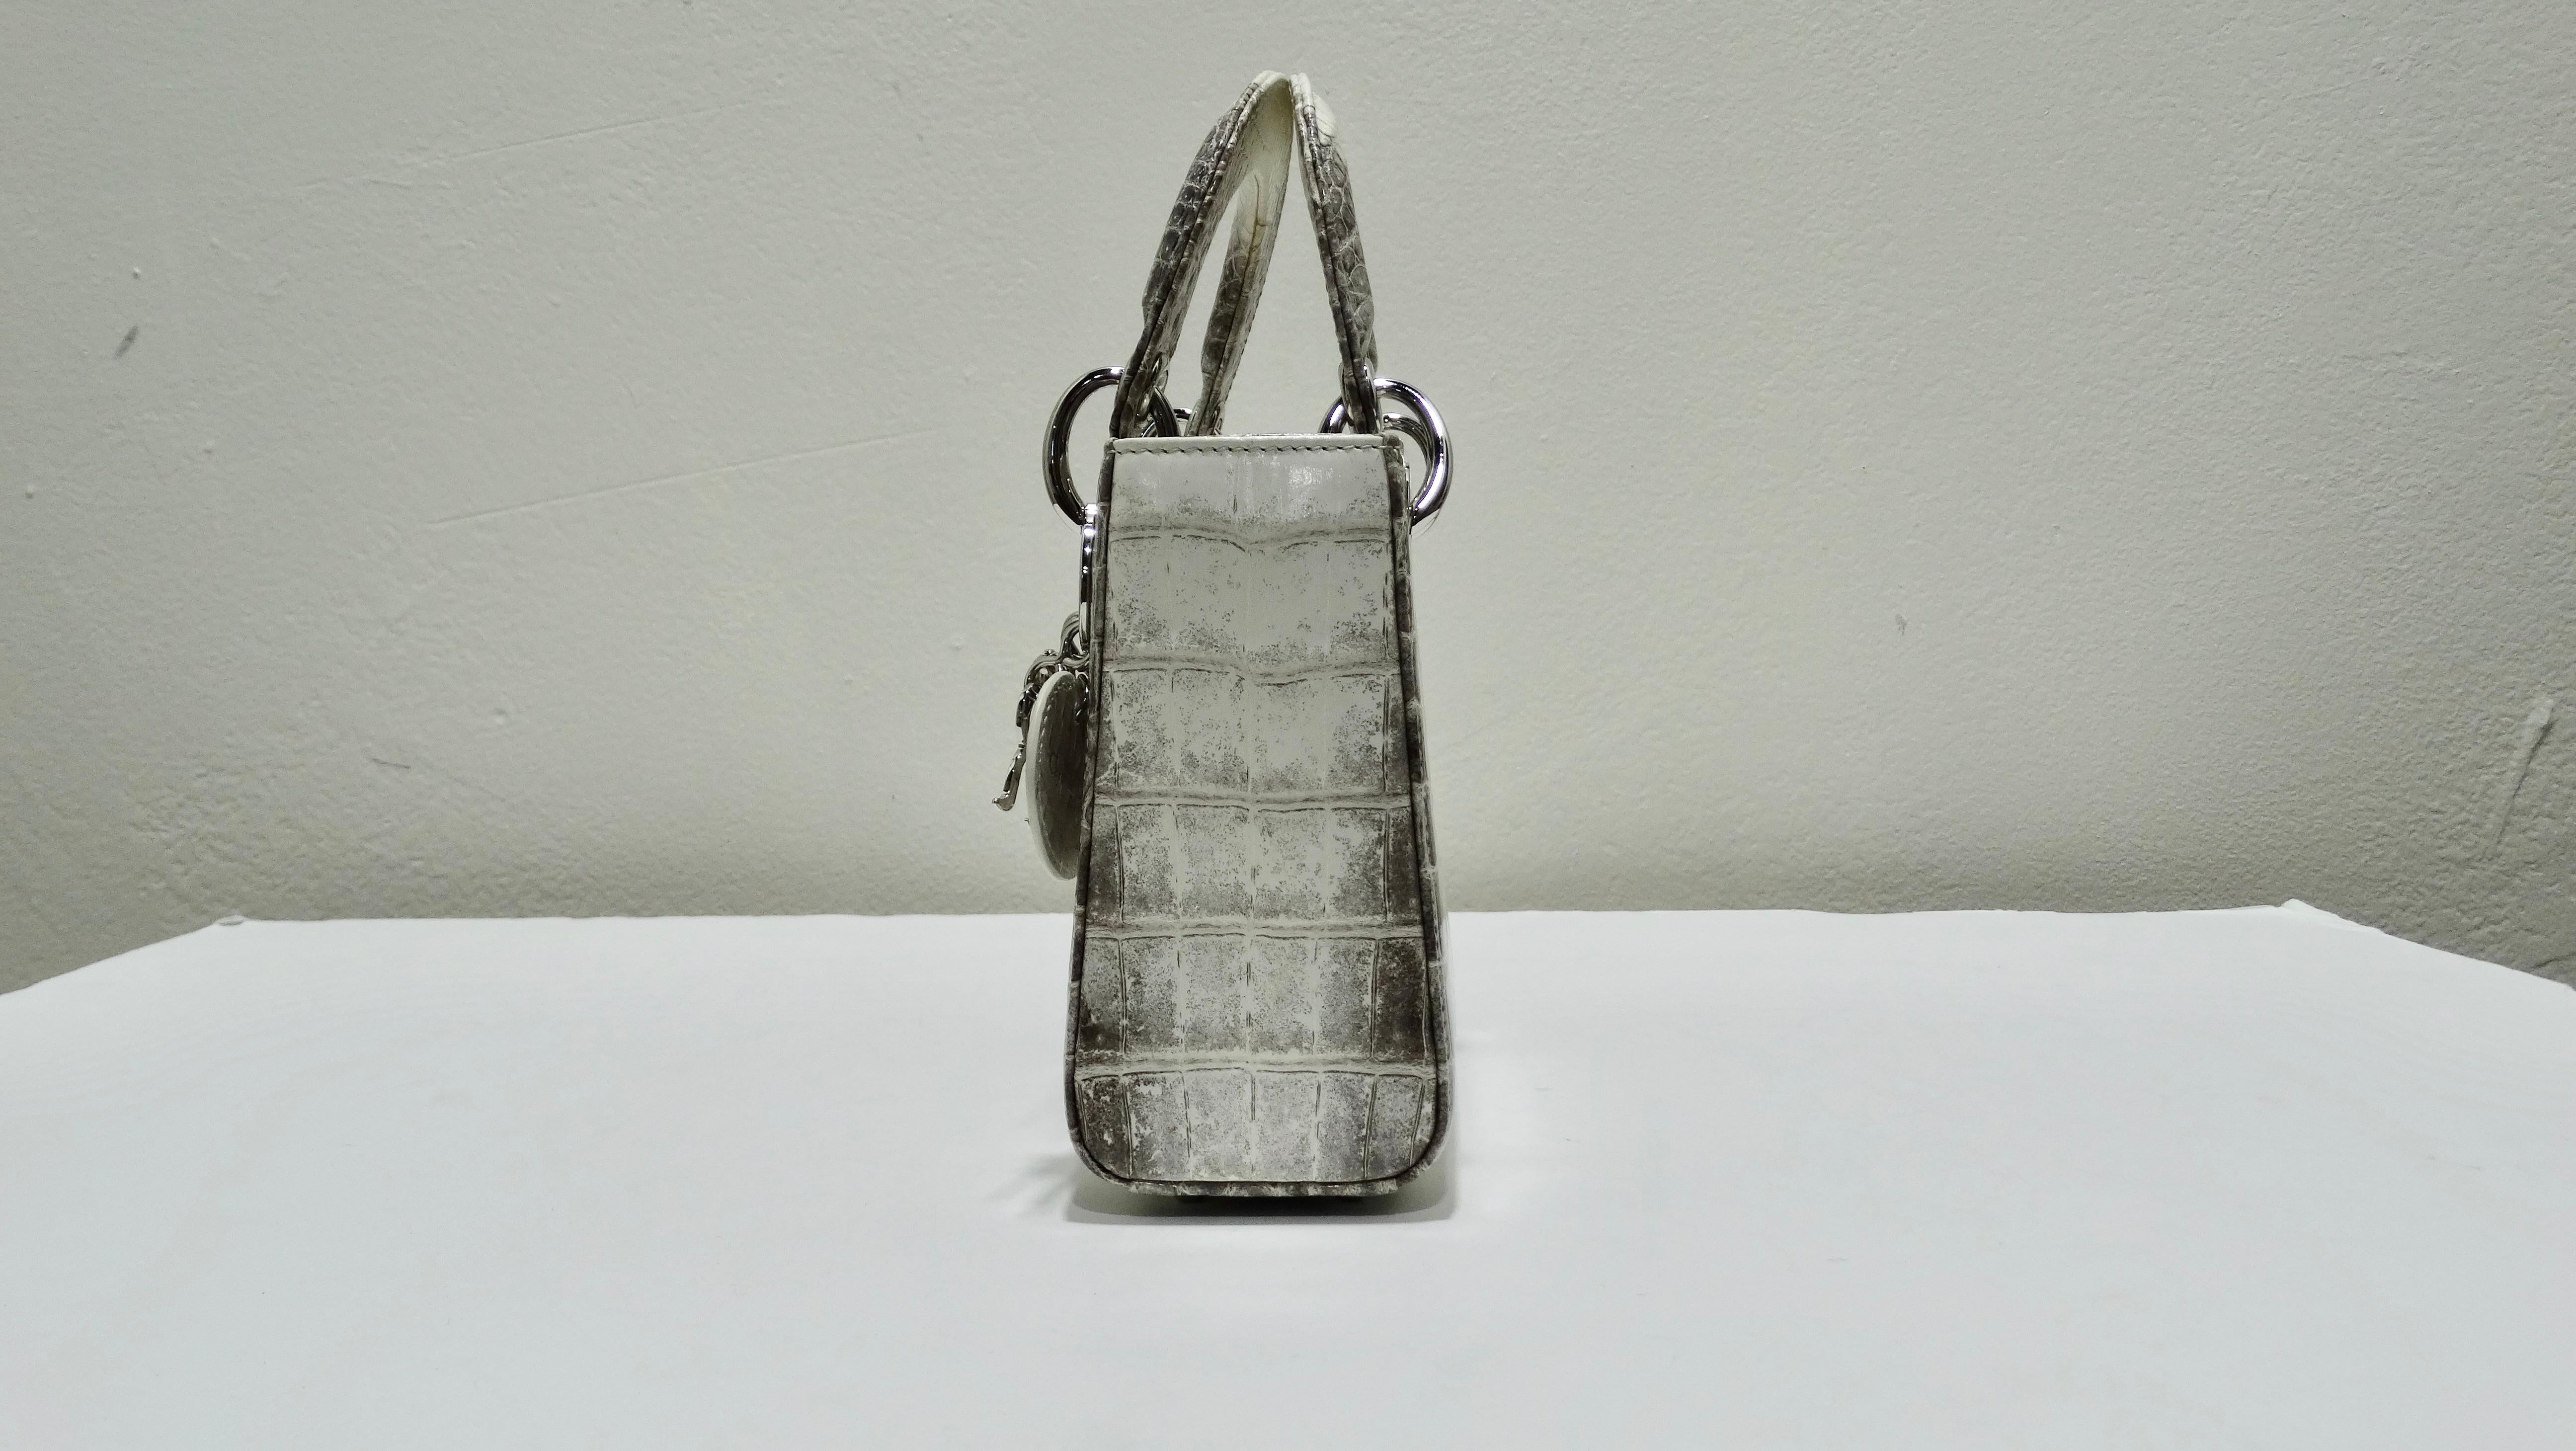 Have your very own Cinderella moment with this extremely unique Christian Dior Himalayan Crocodile Lady Dior Mini Handbag. Its sleek and distinct look portrays the princess look similar to how it was when the bag was first given to Princess Diana.